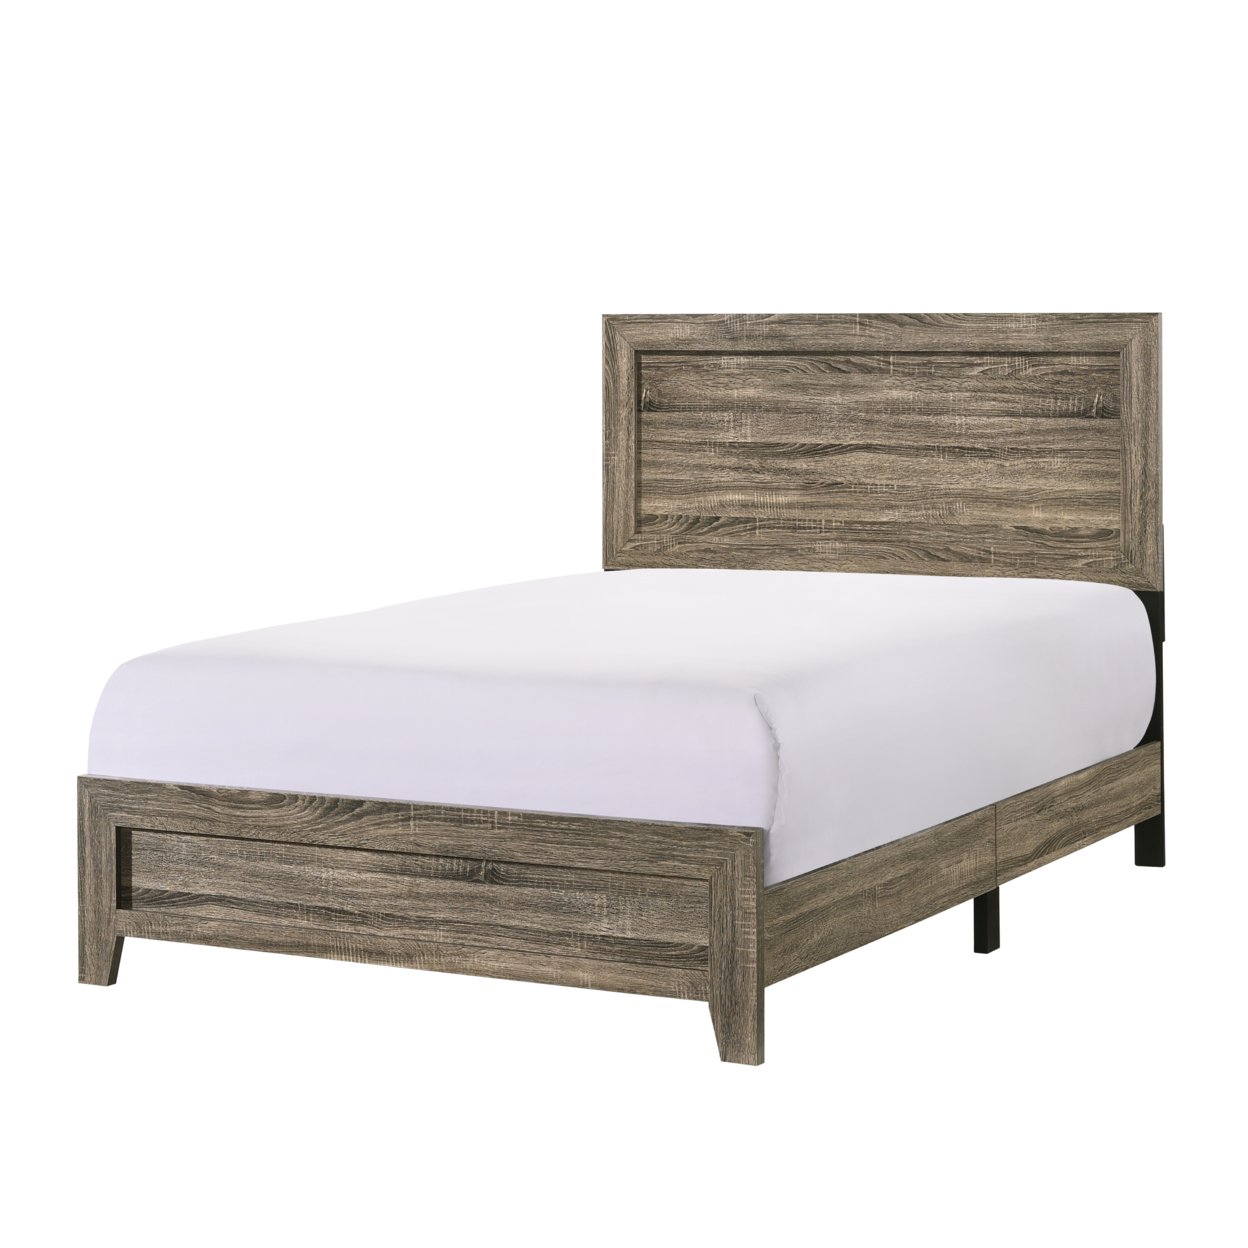 Full Size Wooden Bed With Panel Design Headboard, Rustic Brown- Saltoro Sherpi